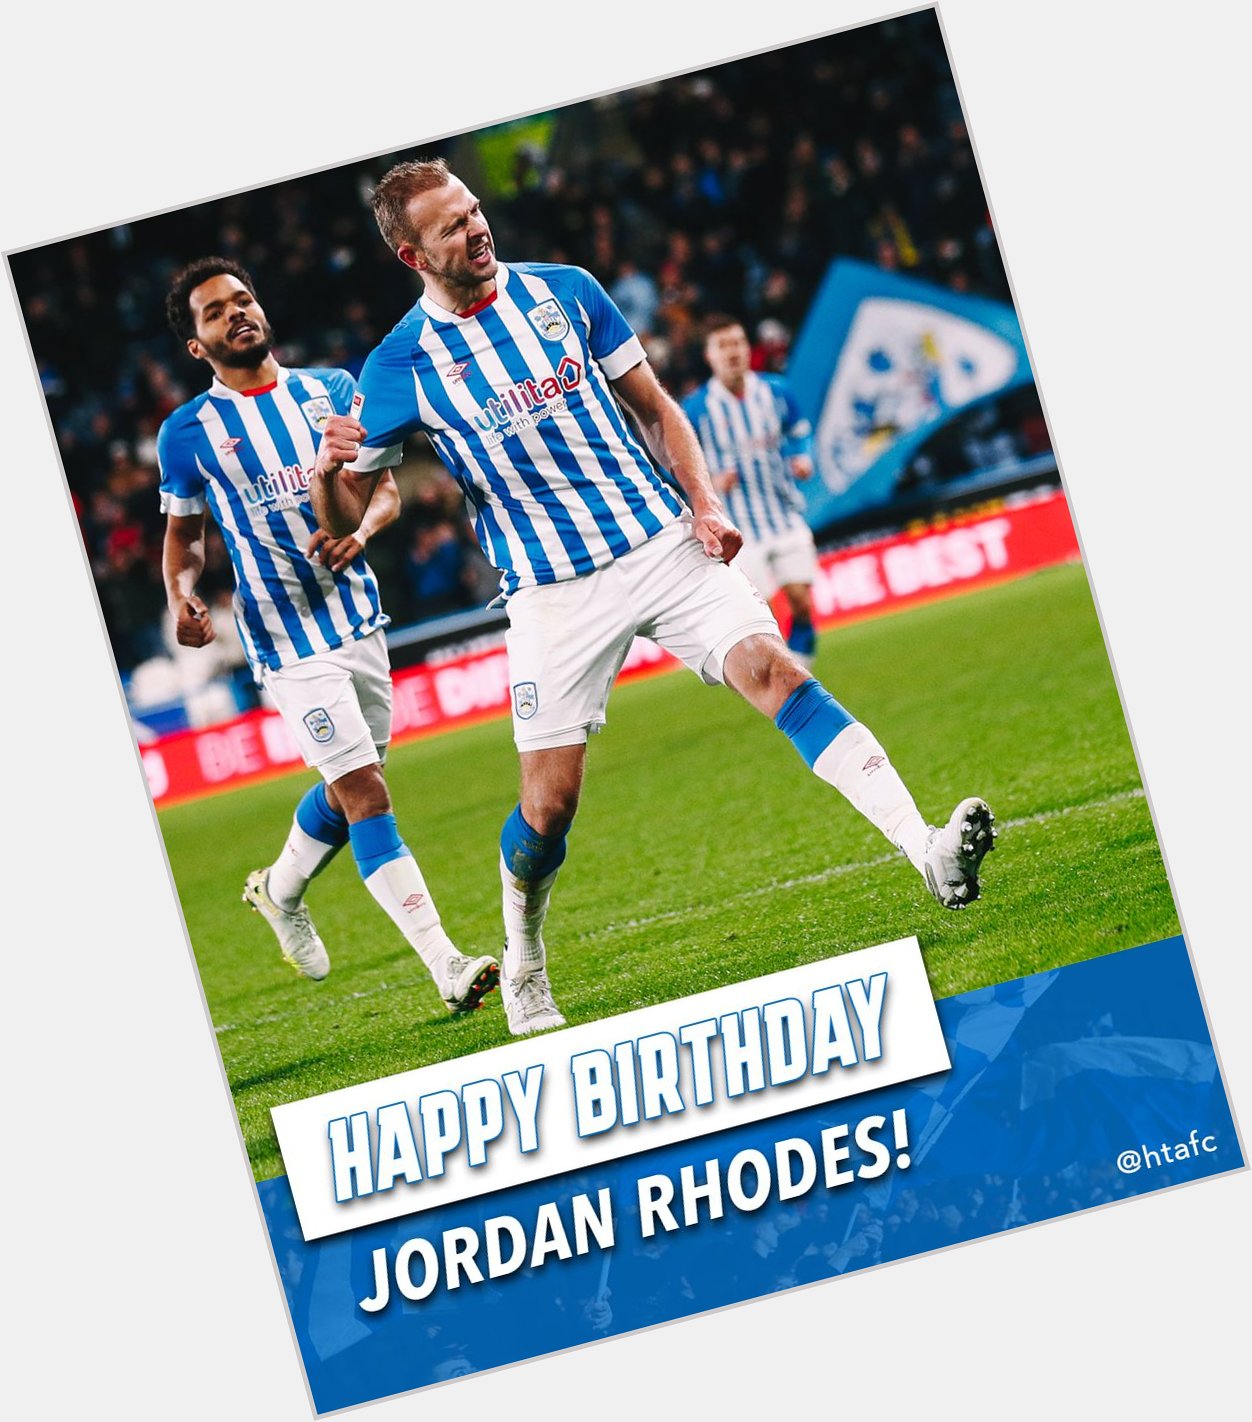  Happy Birthday to the one and only Jordan Rhodes!

We hope you have a brilliant day celebrating  